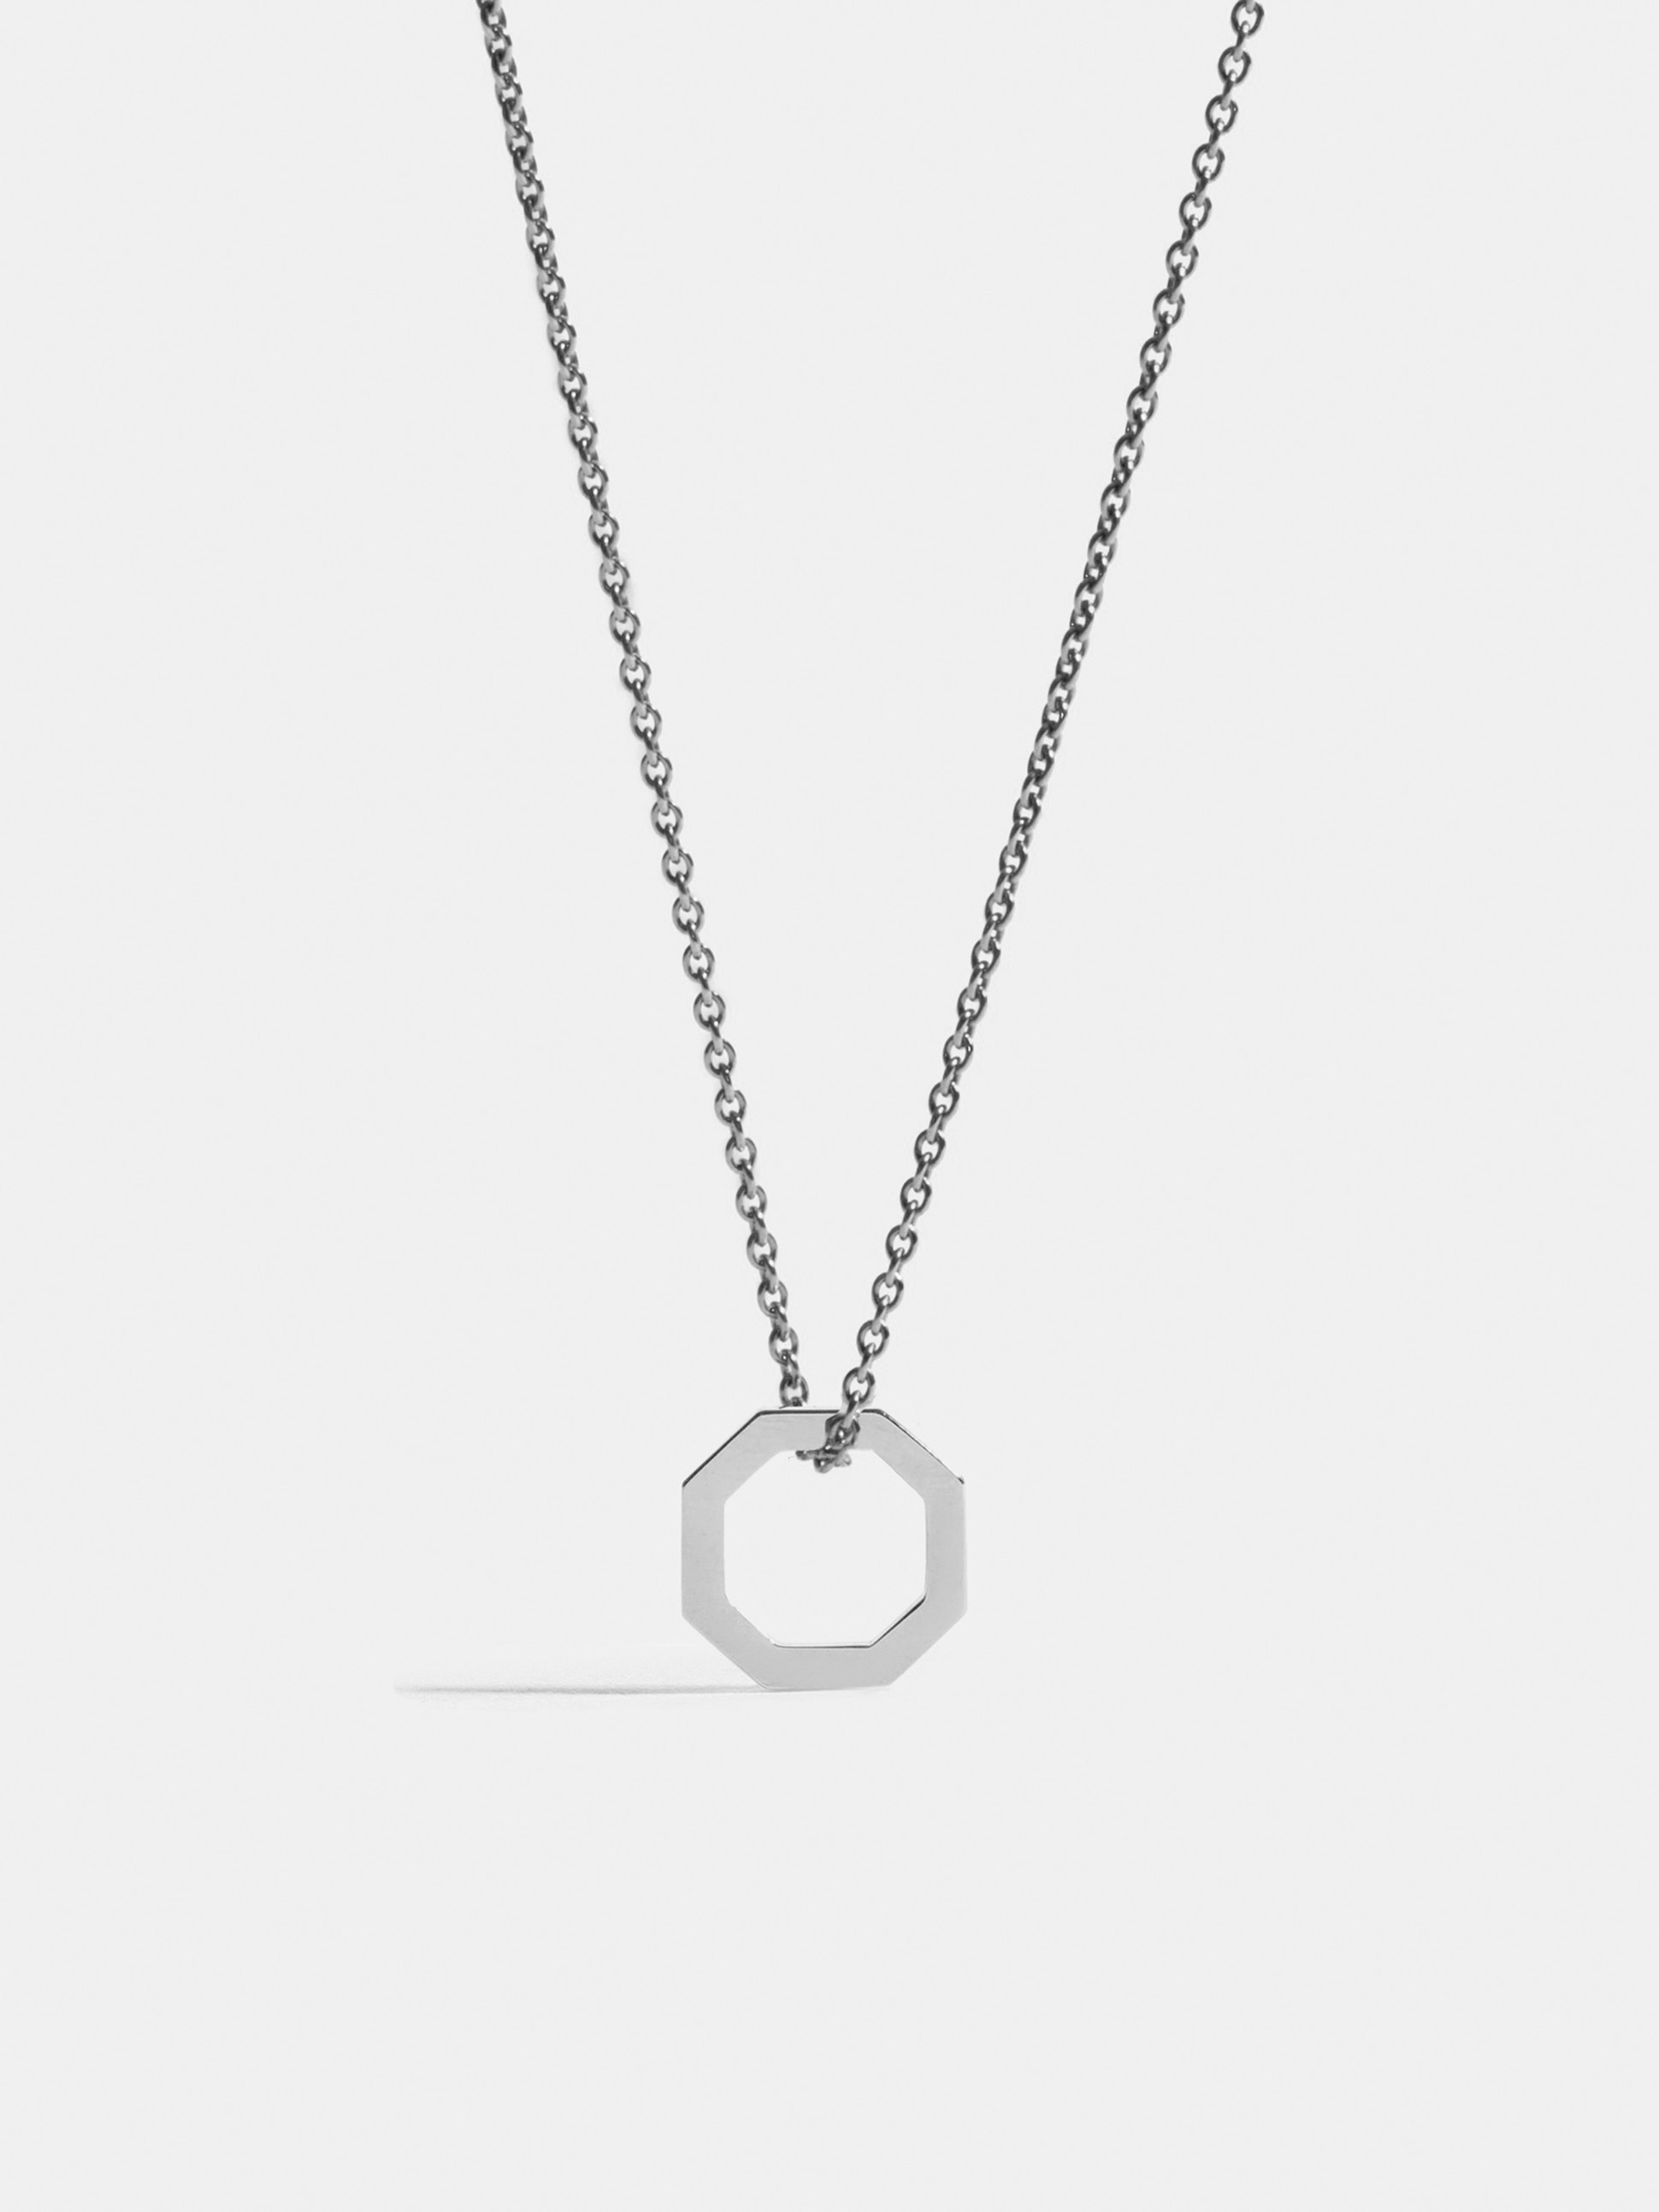 Octogone 10mm pendant in 18k Fairmined ethical white gold, on a chain.